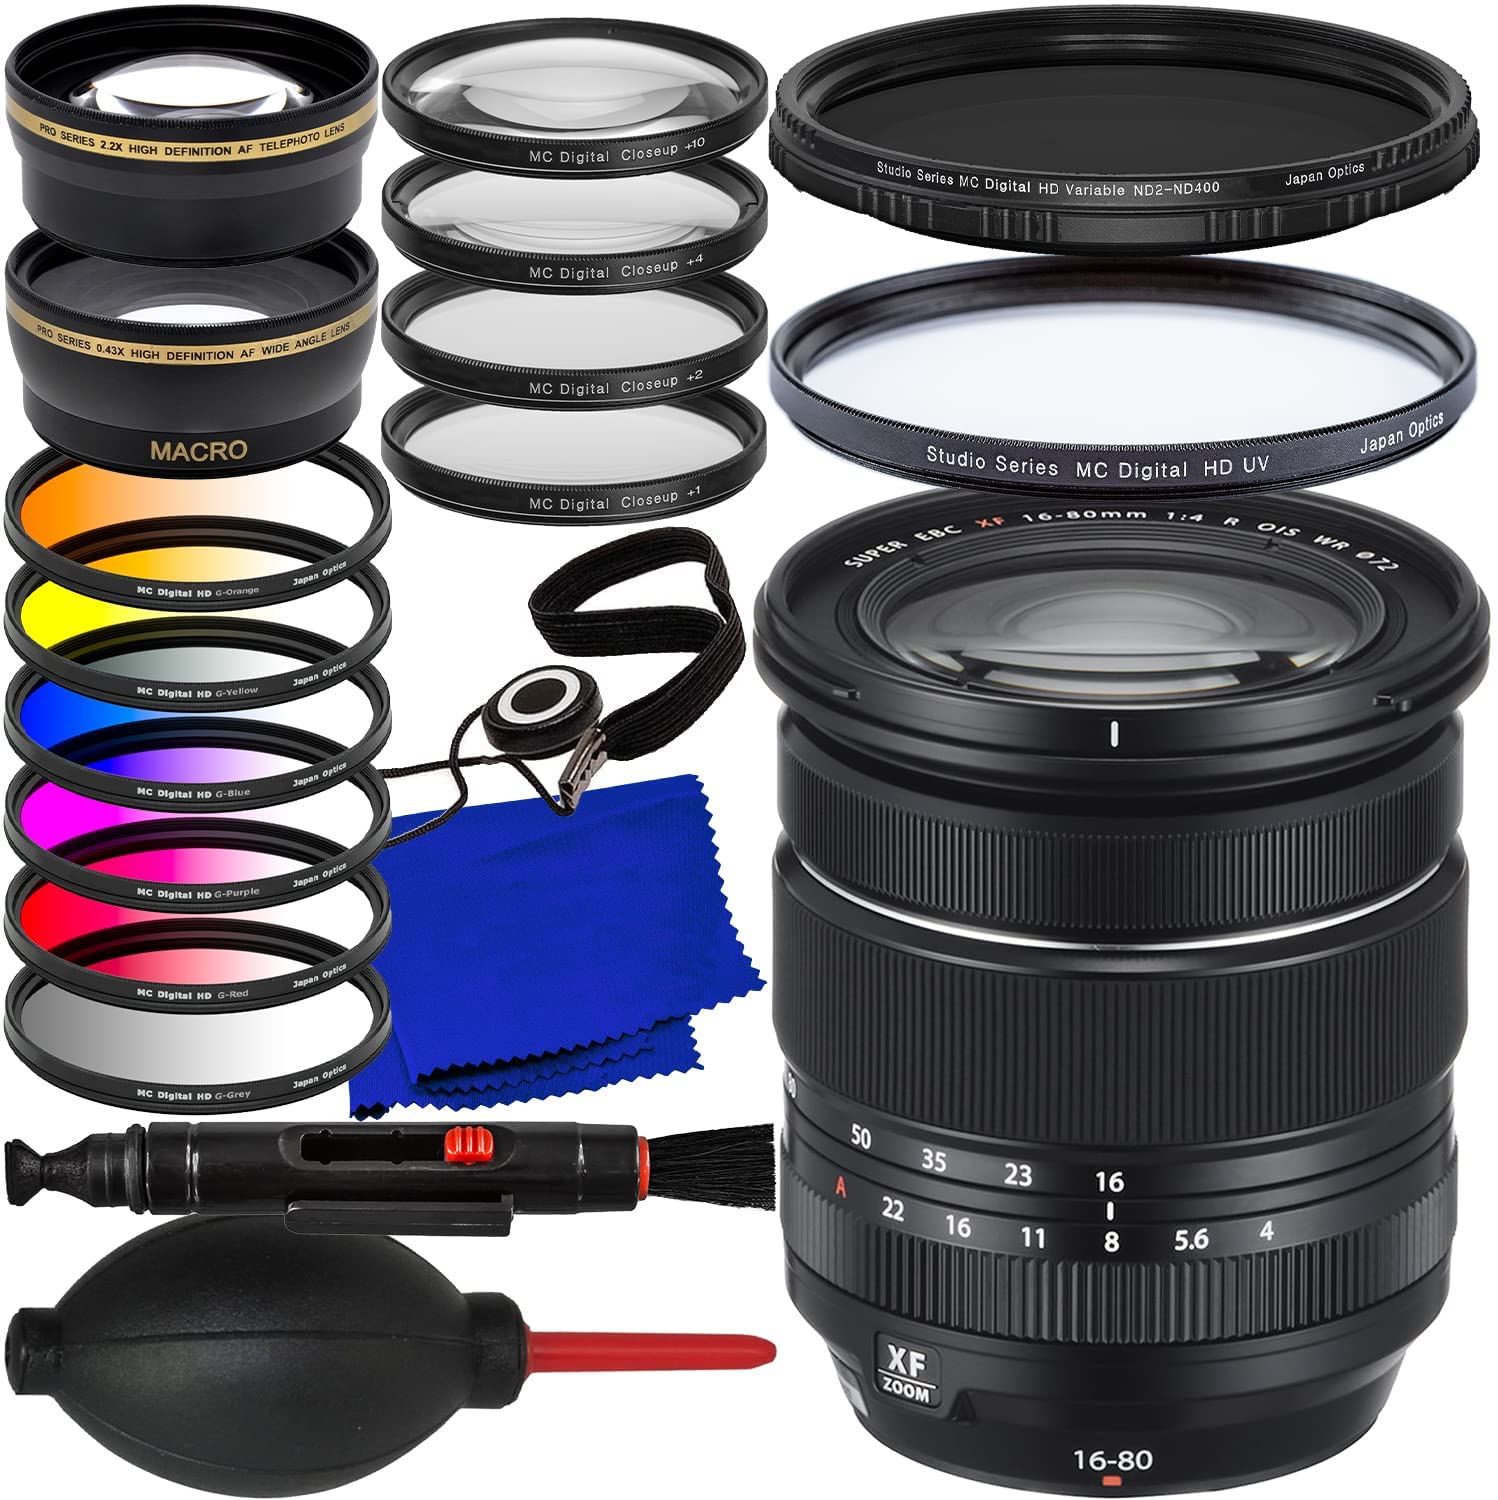 FUJIFILM XF 16-80mm f/4 R OIS WR Lens (White Box) + 0.43x Wide-Angle Lens Attachment with Detachable Macro, Variable Neutral Density Filter (ND2 - ND400), Protective UV Filter & Much More(23pc Bundle)